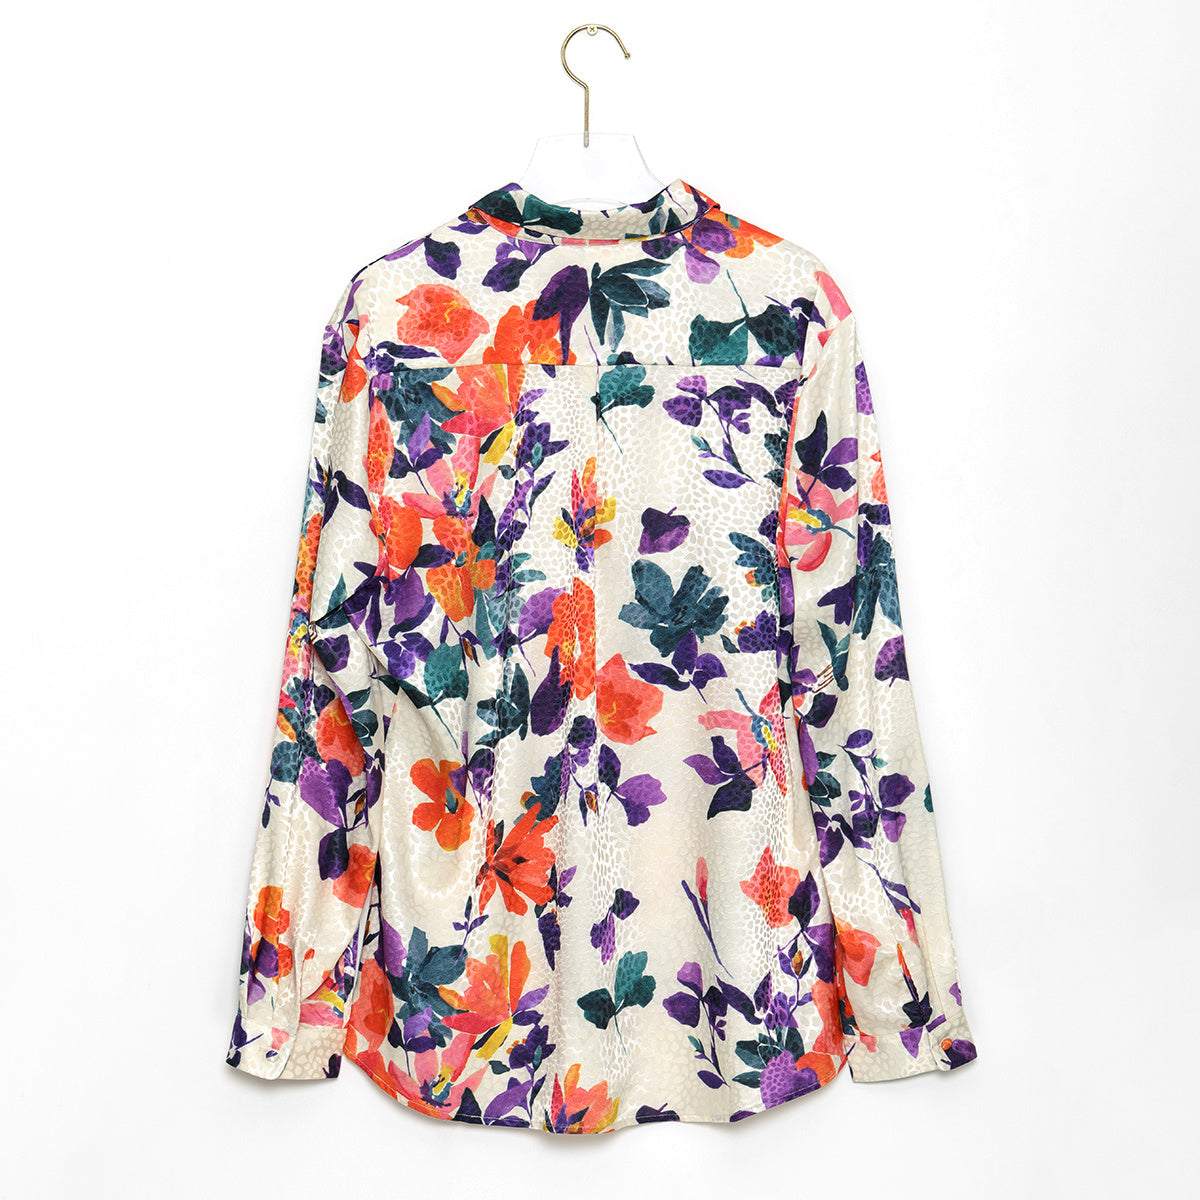 Beachy chic, even when it's cool: woman styles a long sleeve floral Hawaiian shirt.